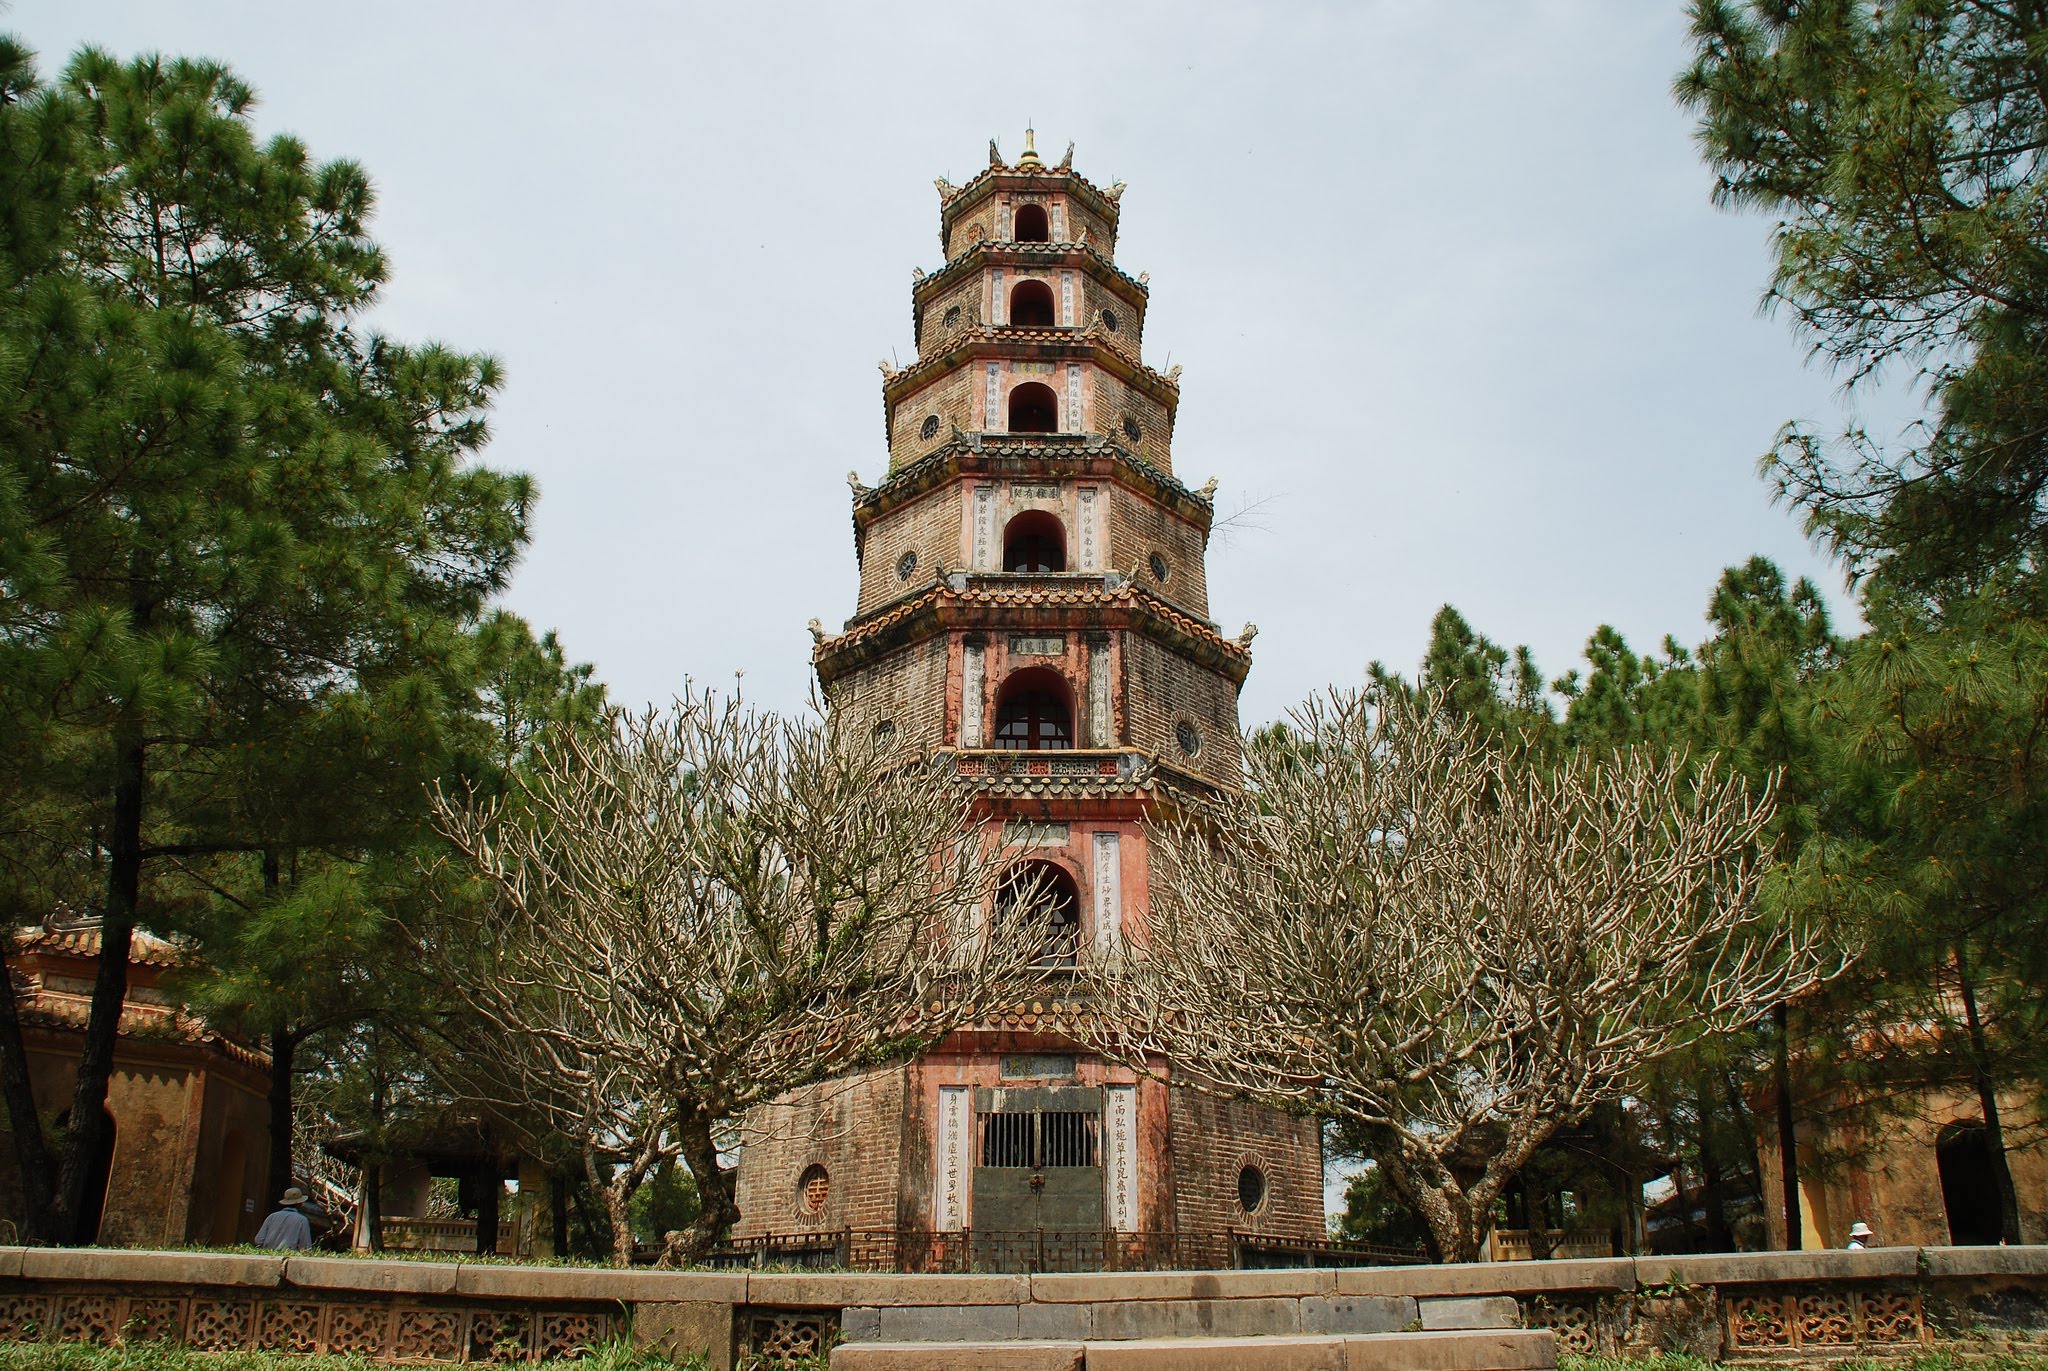 Thien Mu Pagoda-Hue, Vietnam (With Historical Facts) - YouTube